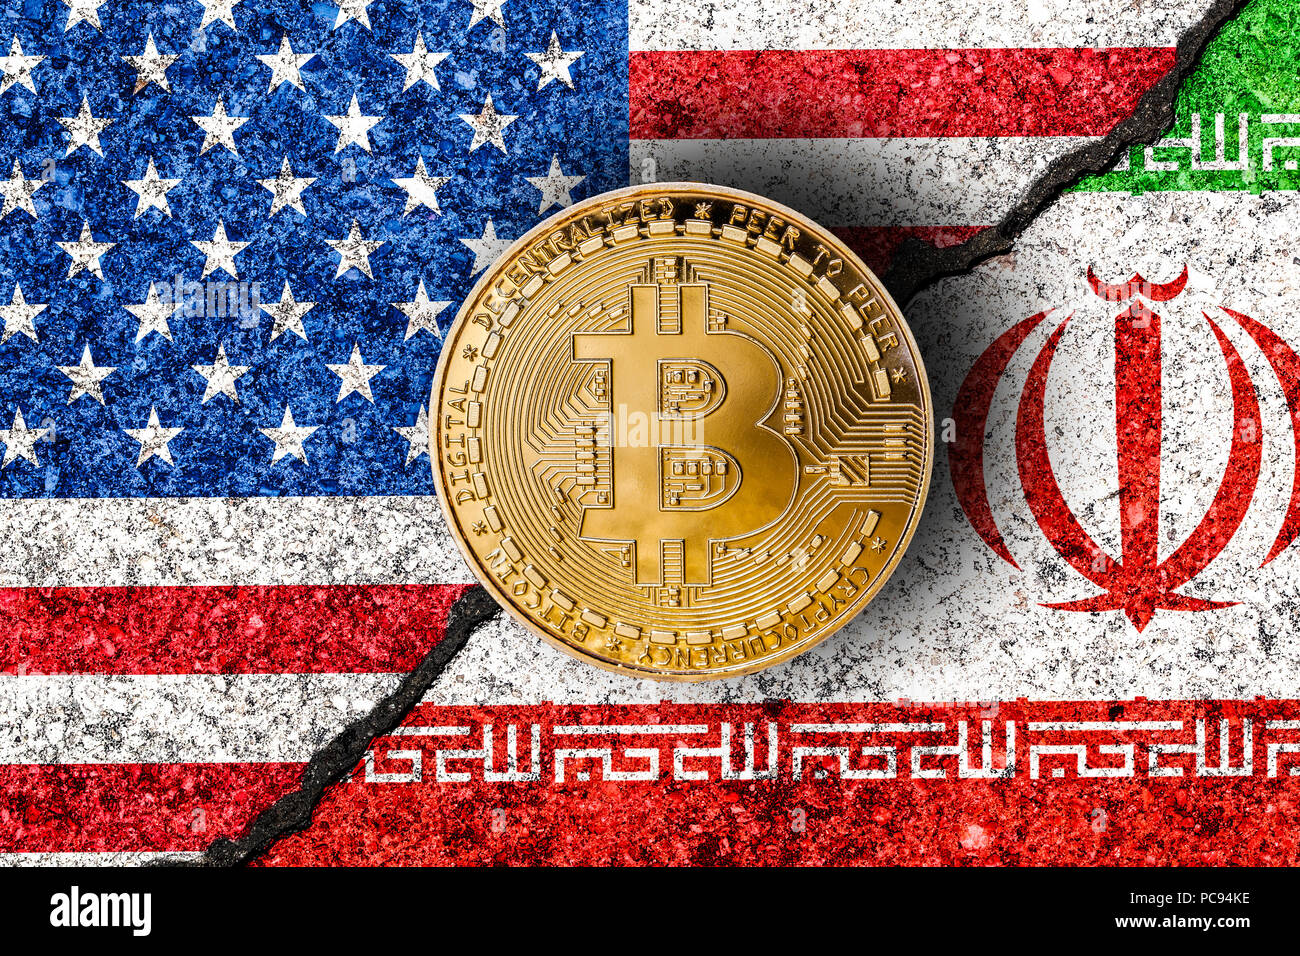 Bitcoin with Iranian and USA flags in background/Iran USA conflict concept Stock Photo